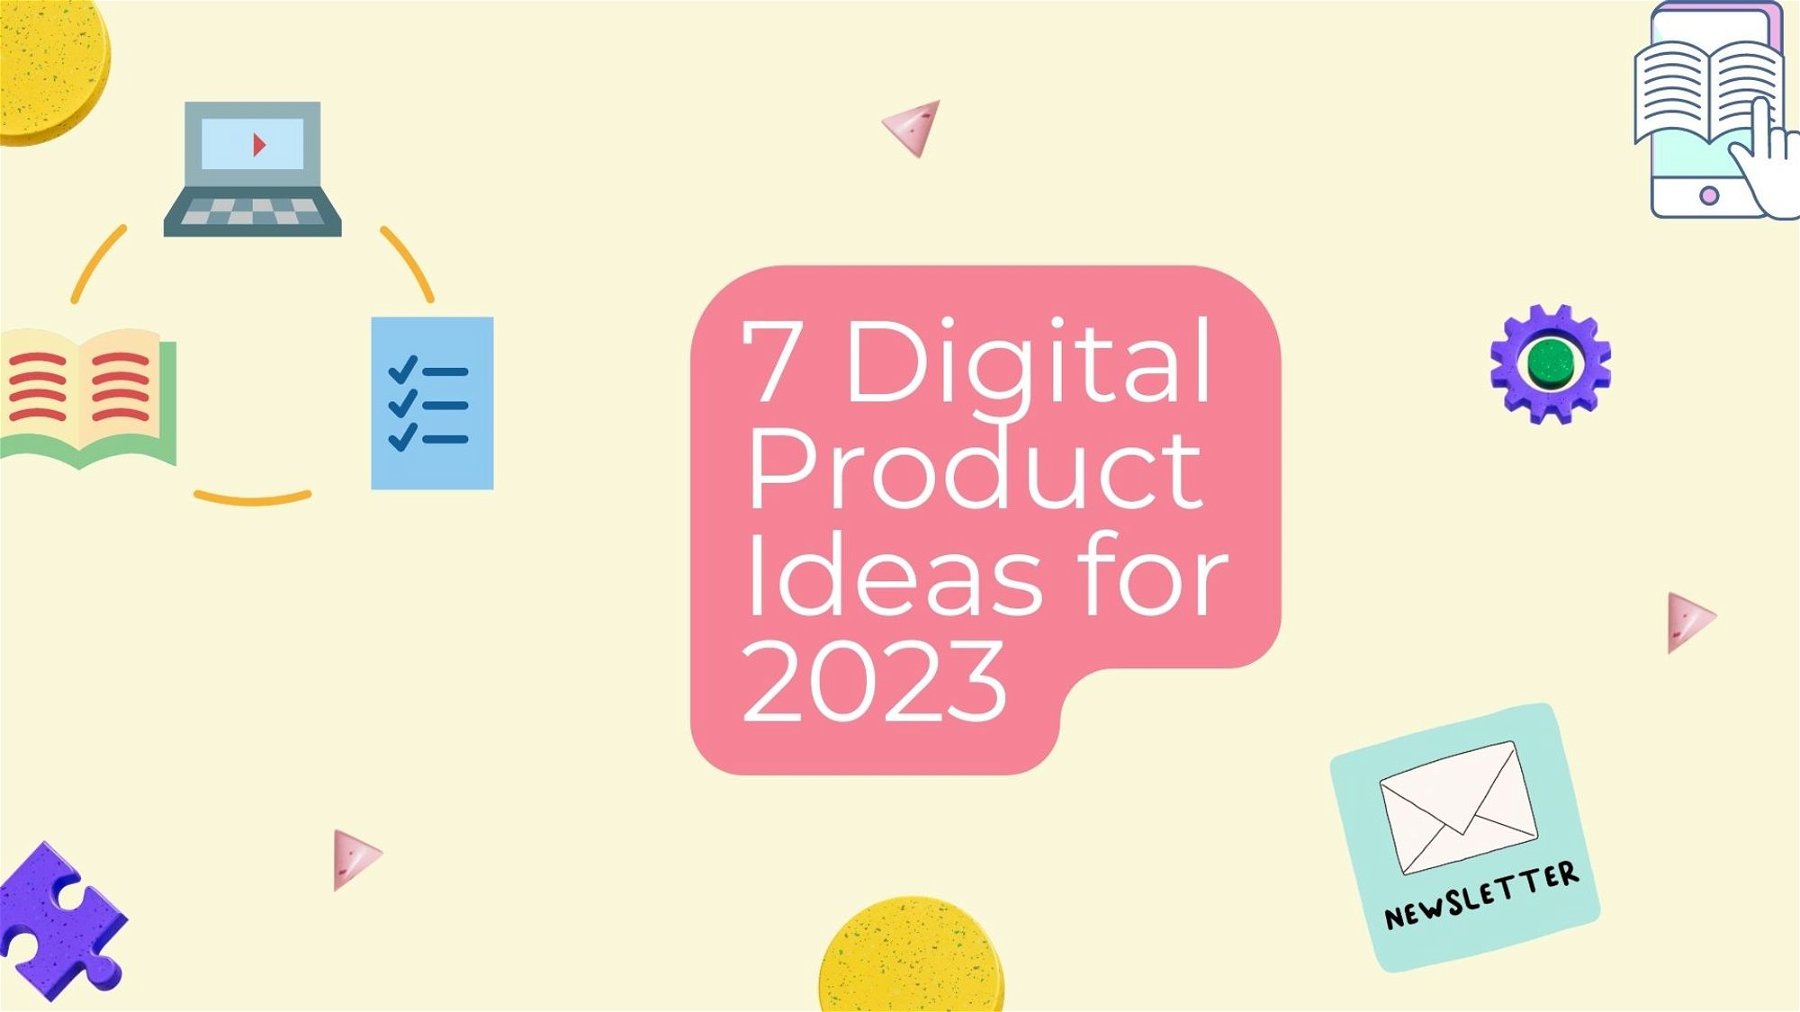  7 Digital Product Ideas for 2023